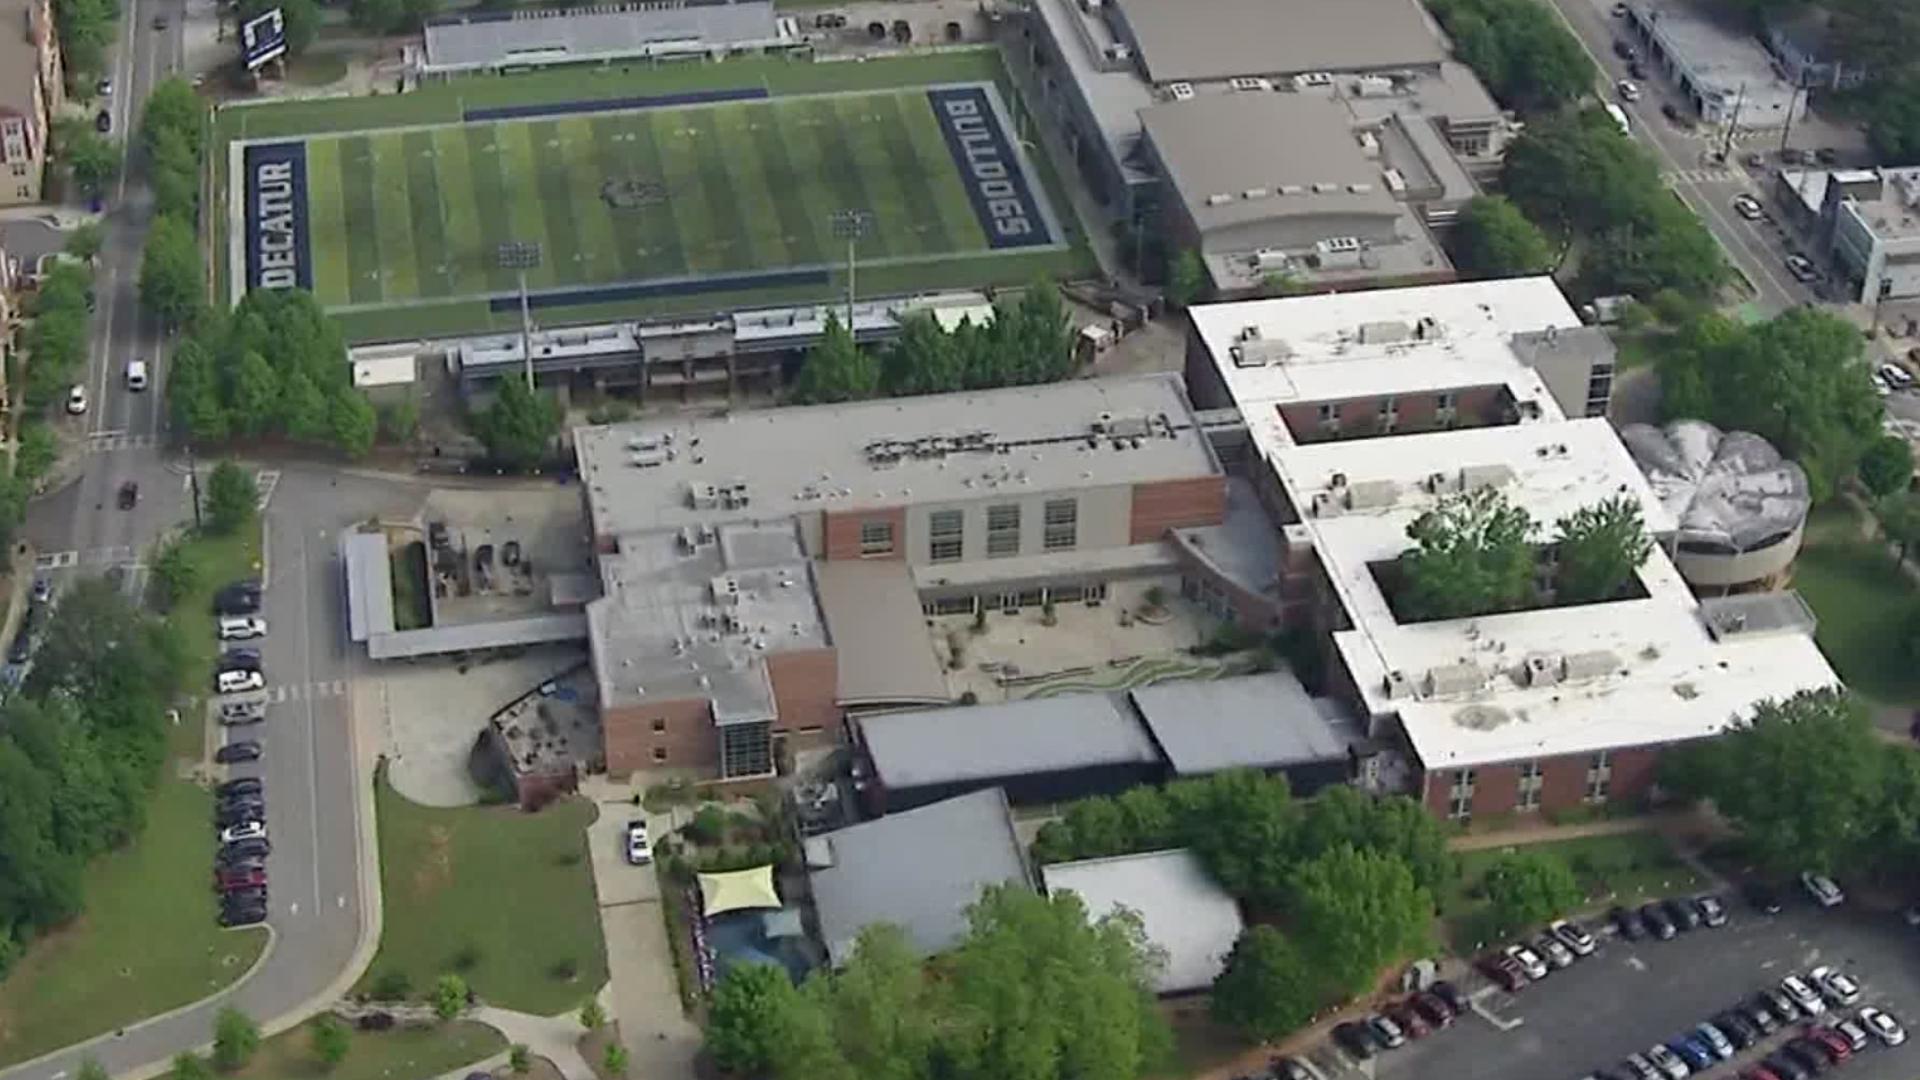 A lockdown at Decatur High School has been lifted after a gun was found on campus on Friday, according to school officials and the Decatur Police Department.